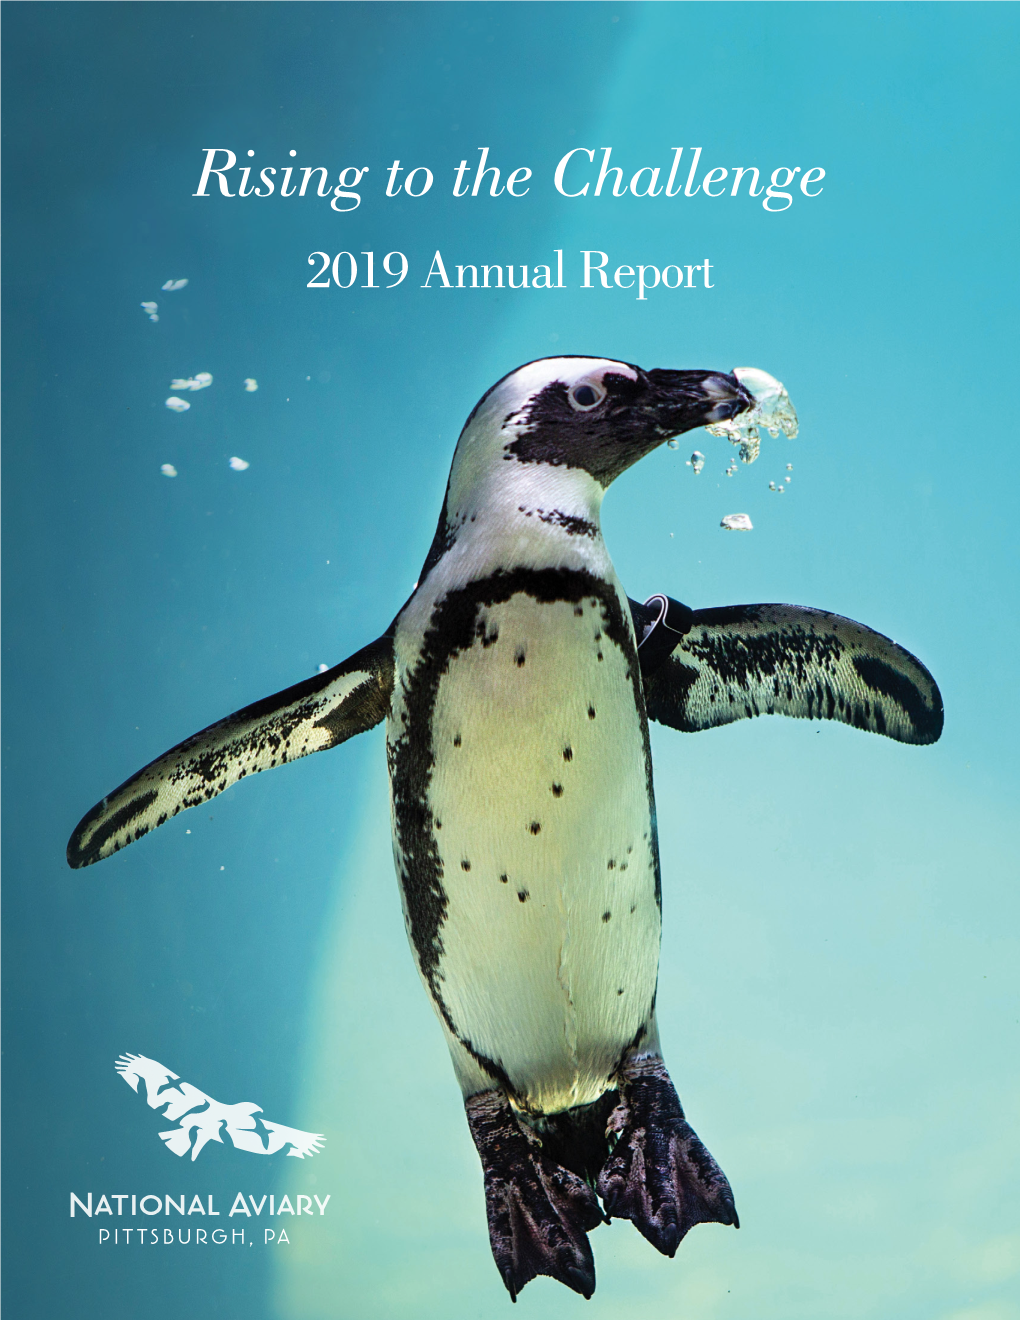 Rising to the Challenge 2019 Annual Report